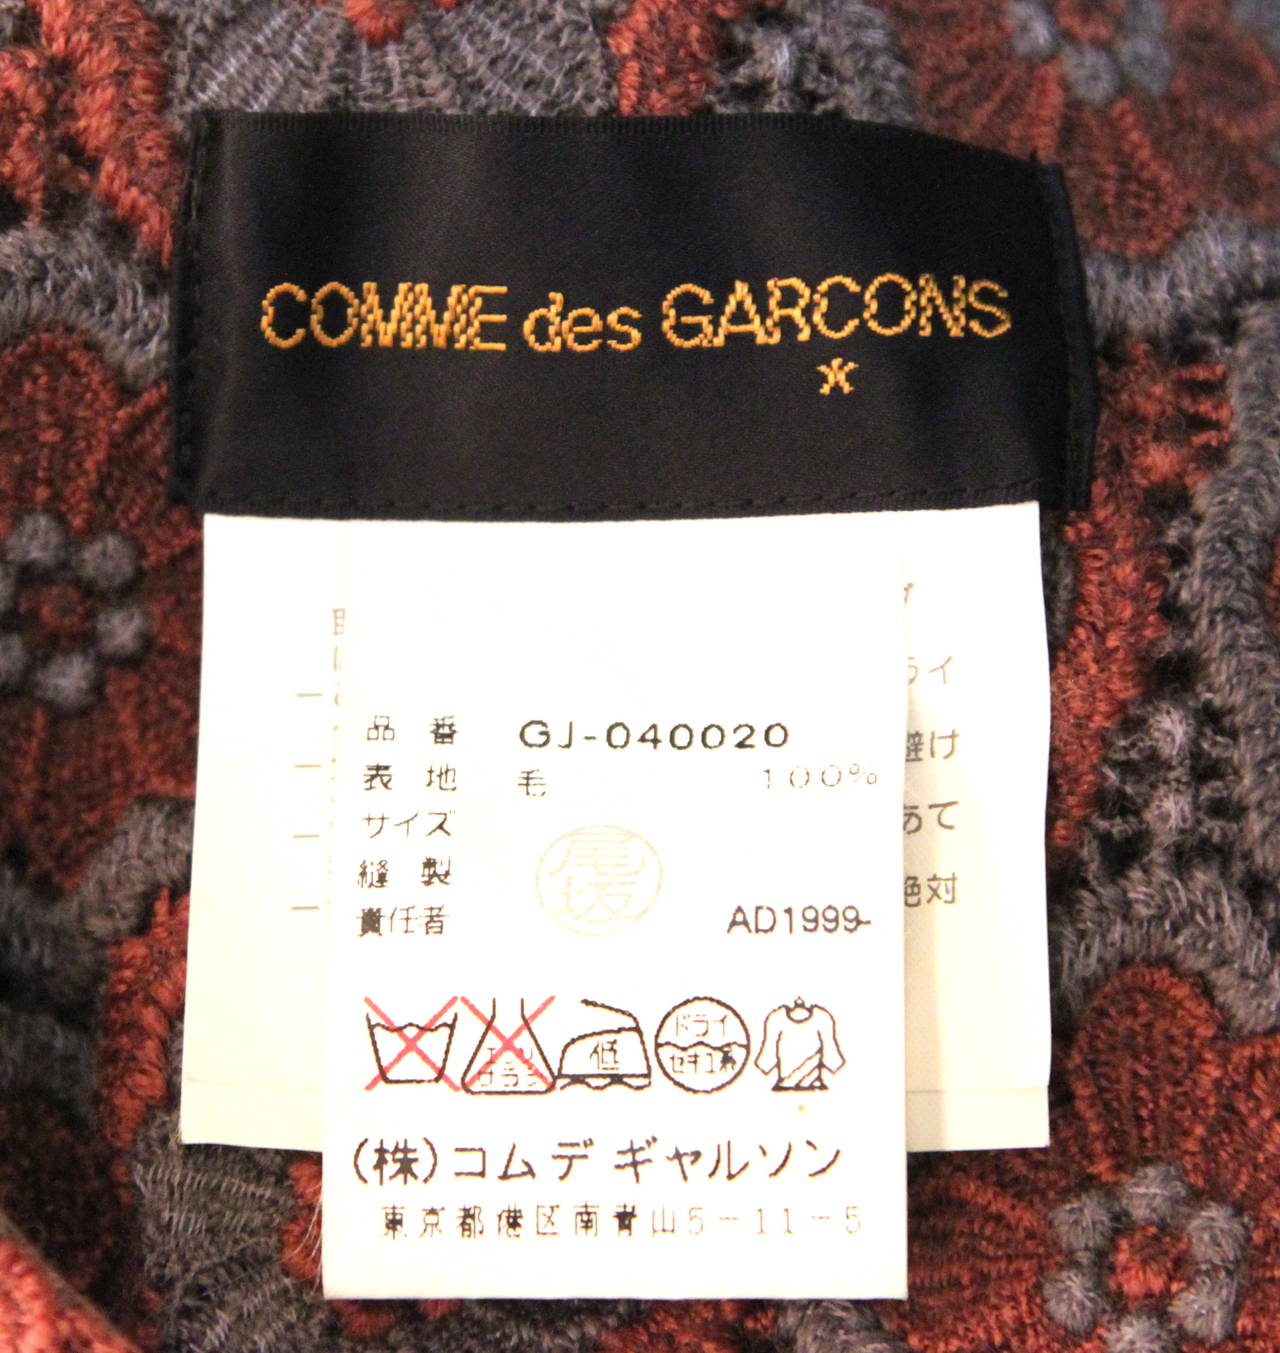 1999 COMME DES GARONS Venetian lace jacket with oversized safety pin closure 1